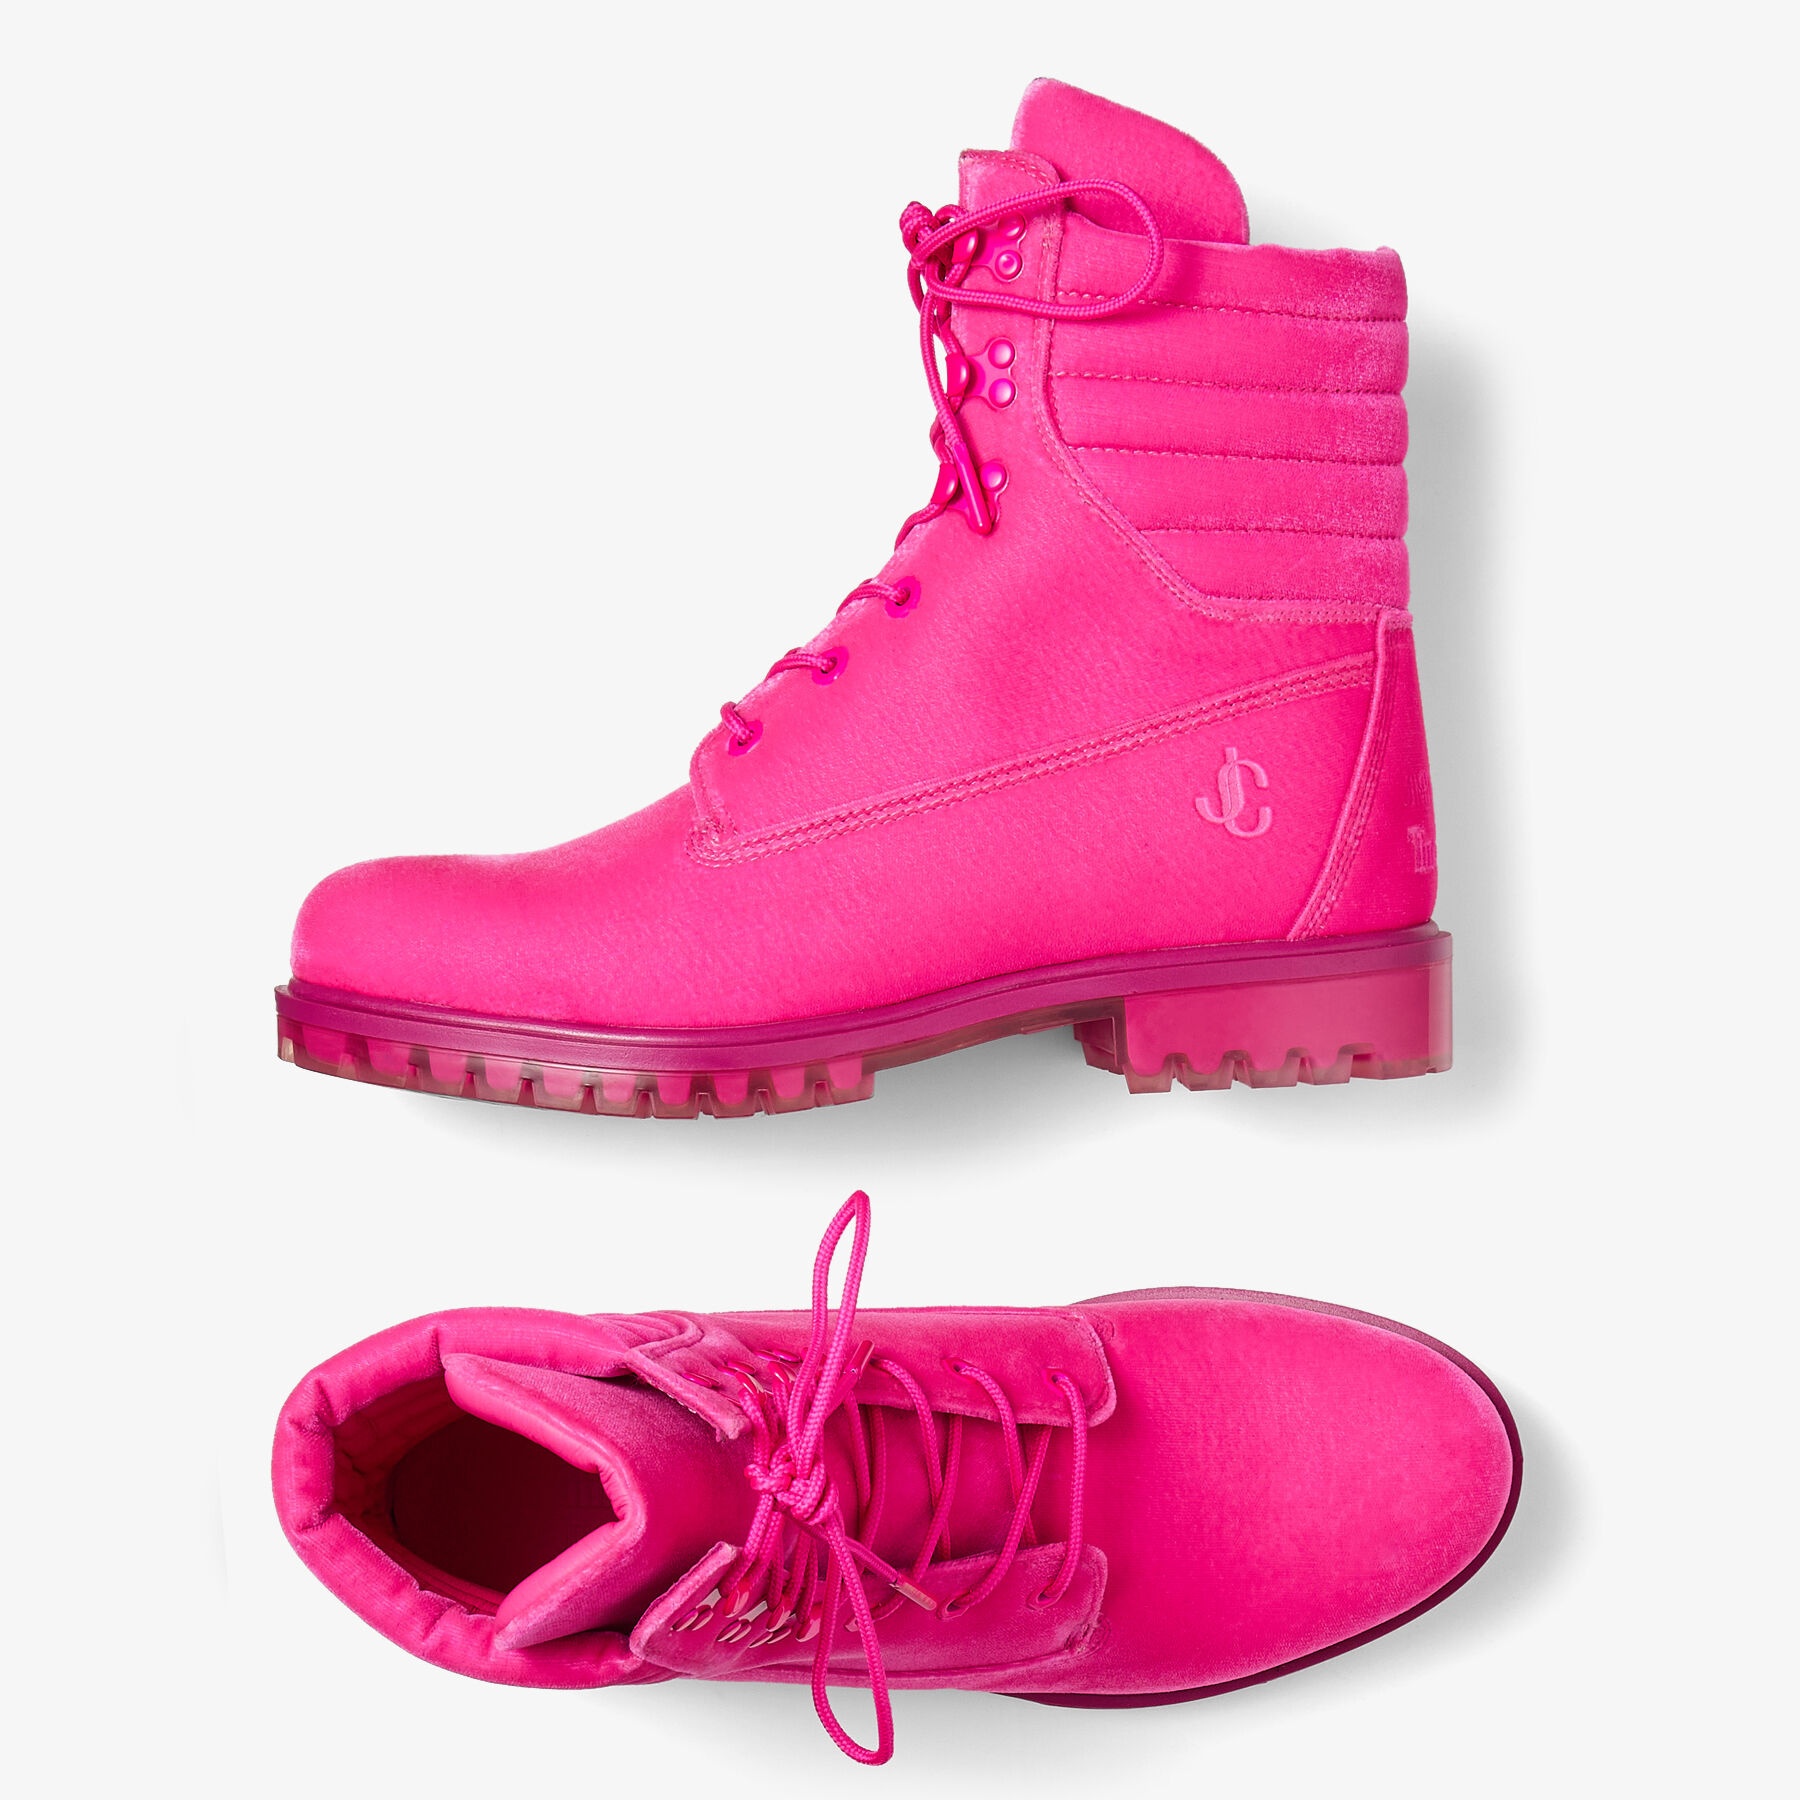 JIMMY CHOO X TIMBERLAND 8 INCH PUFFER BOOT
Hot Pink Timberland Velvet Ankle Boots - 5